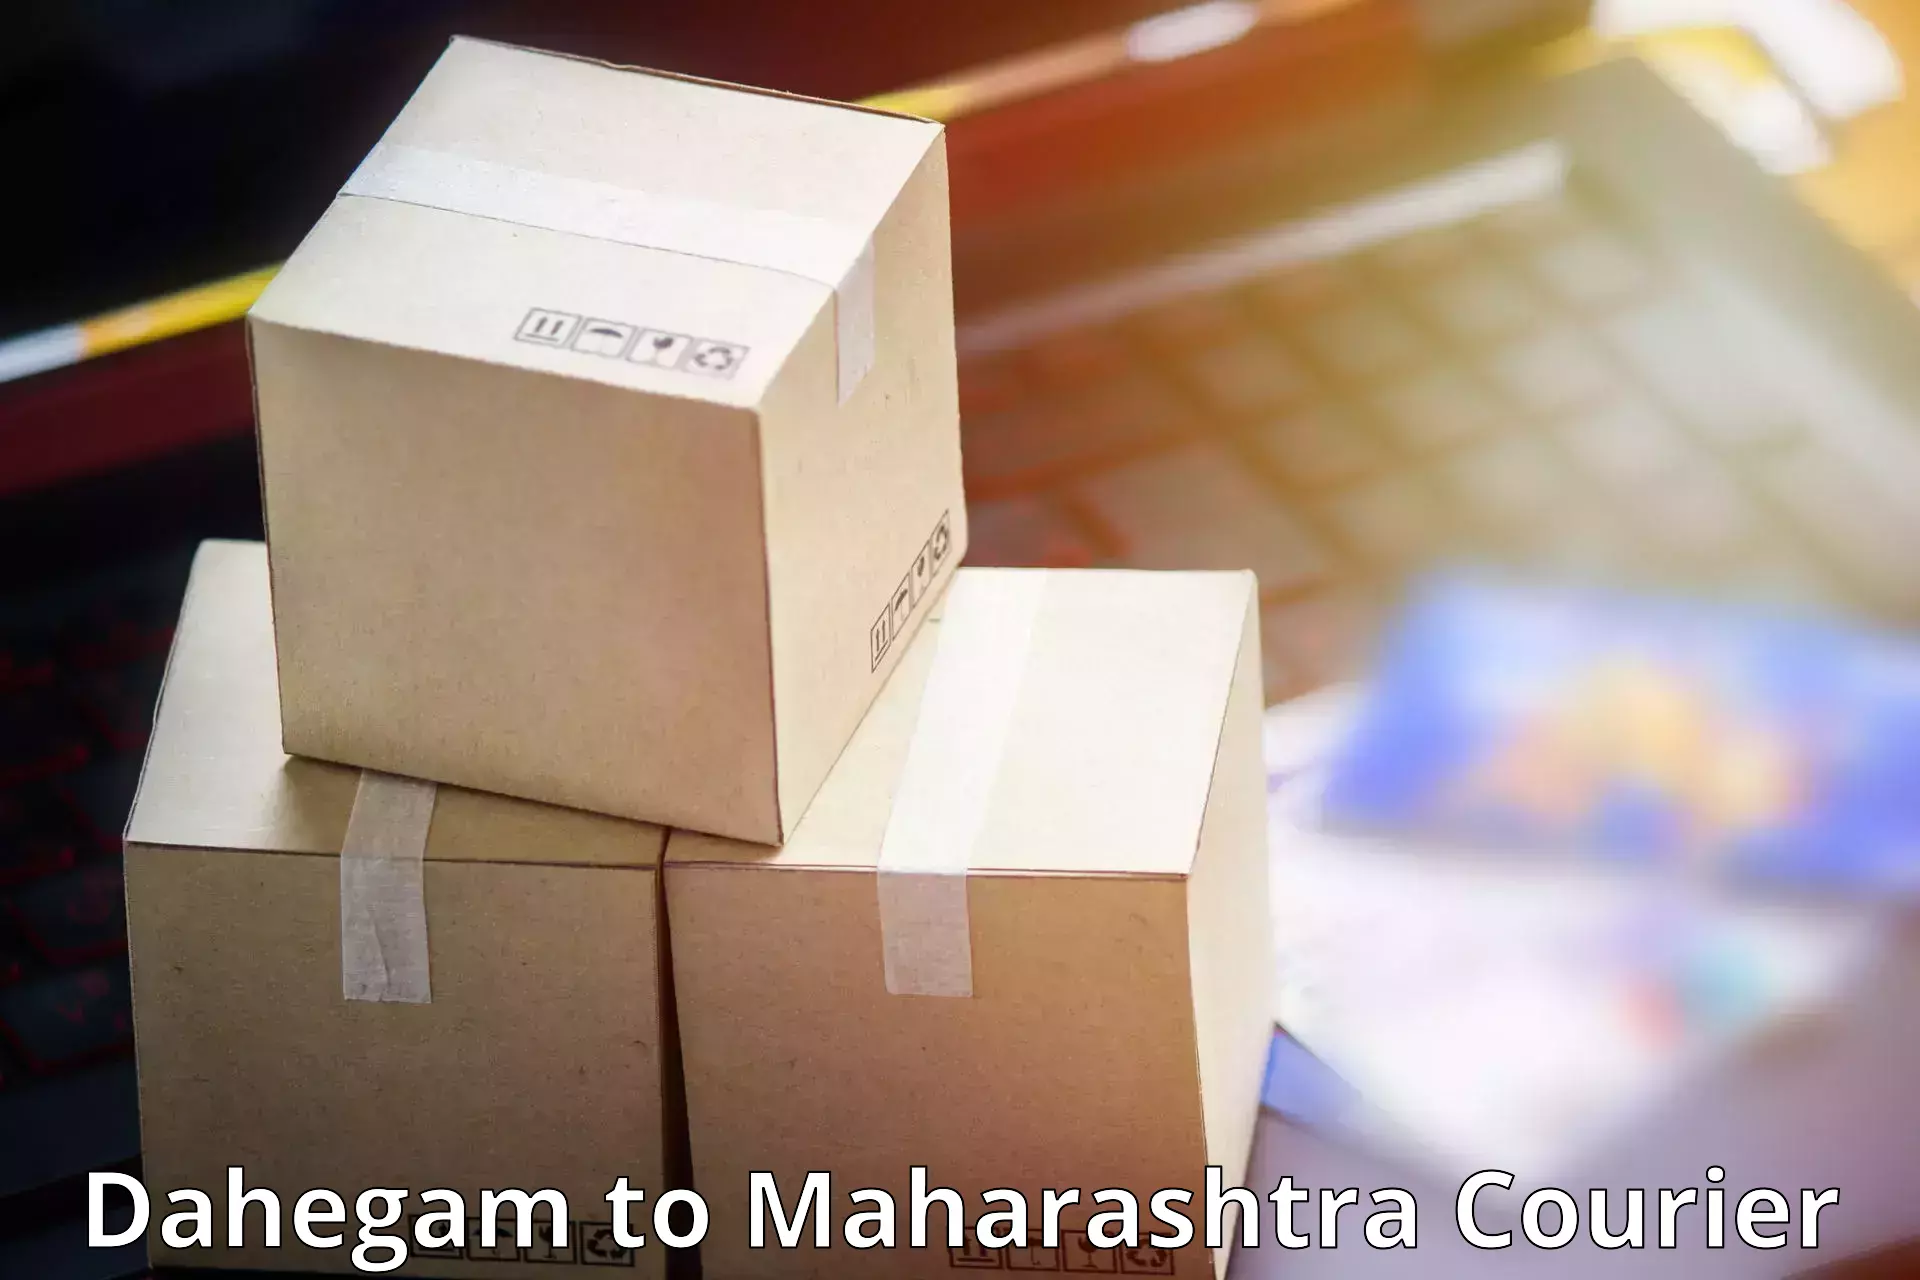 Express package delivery in Dahegam to Mumbai Port